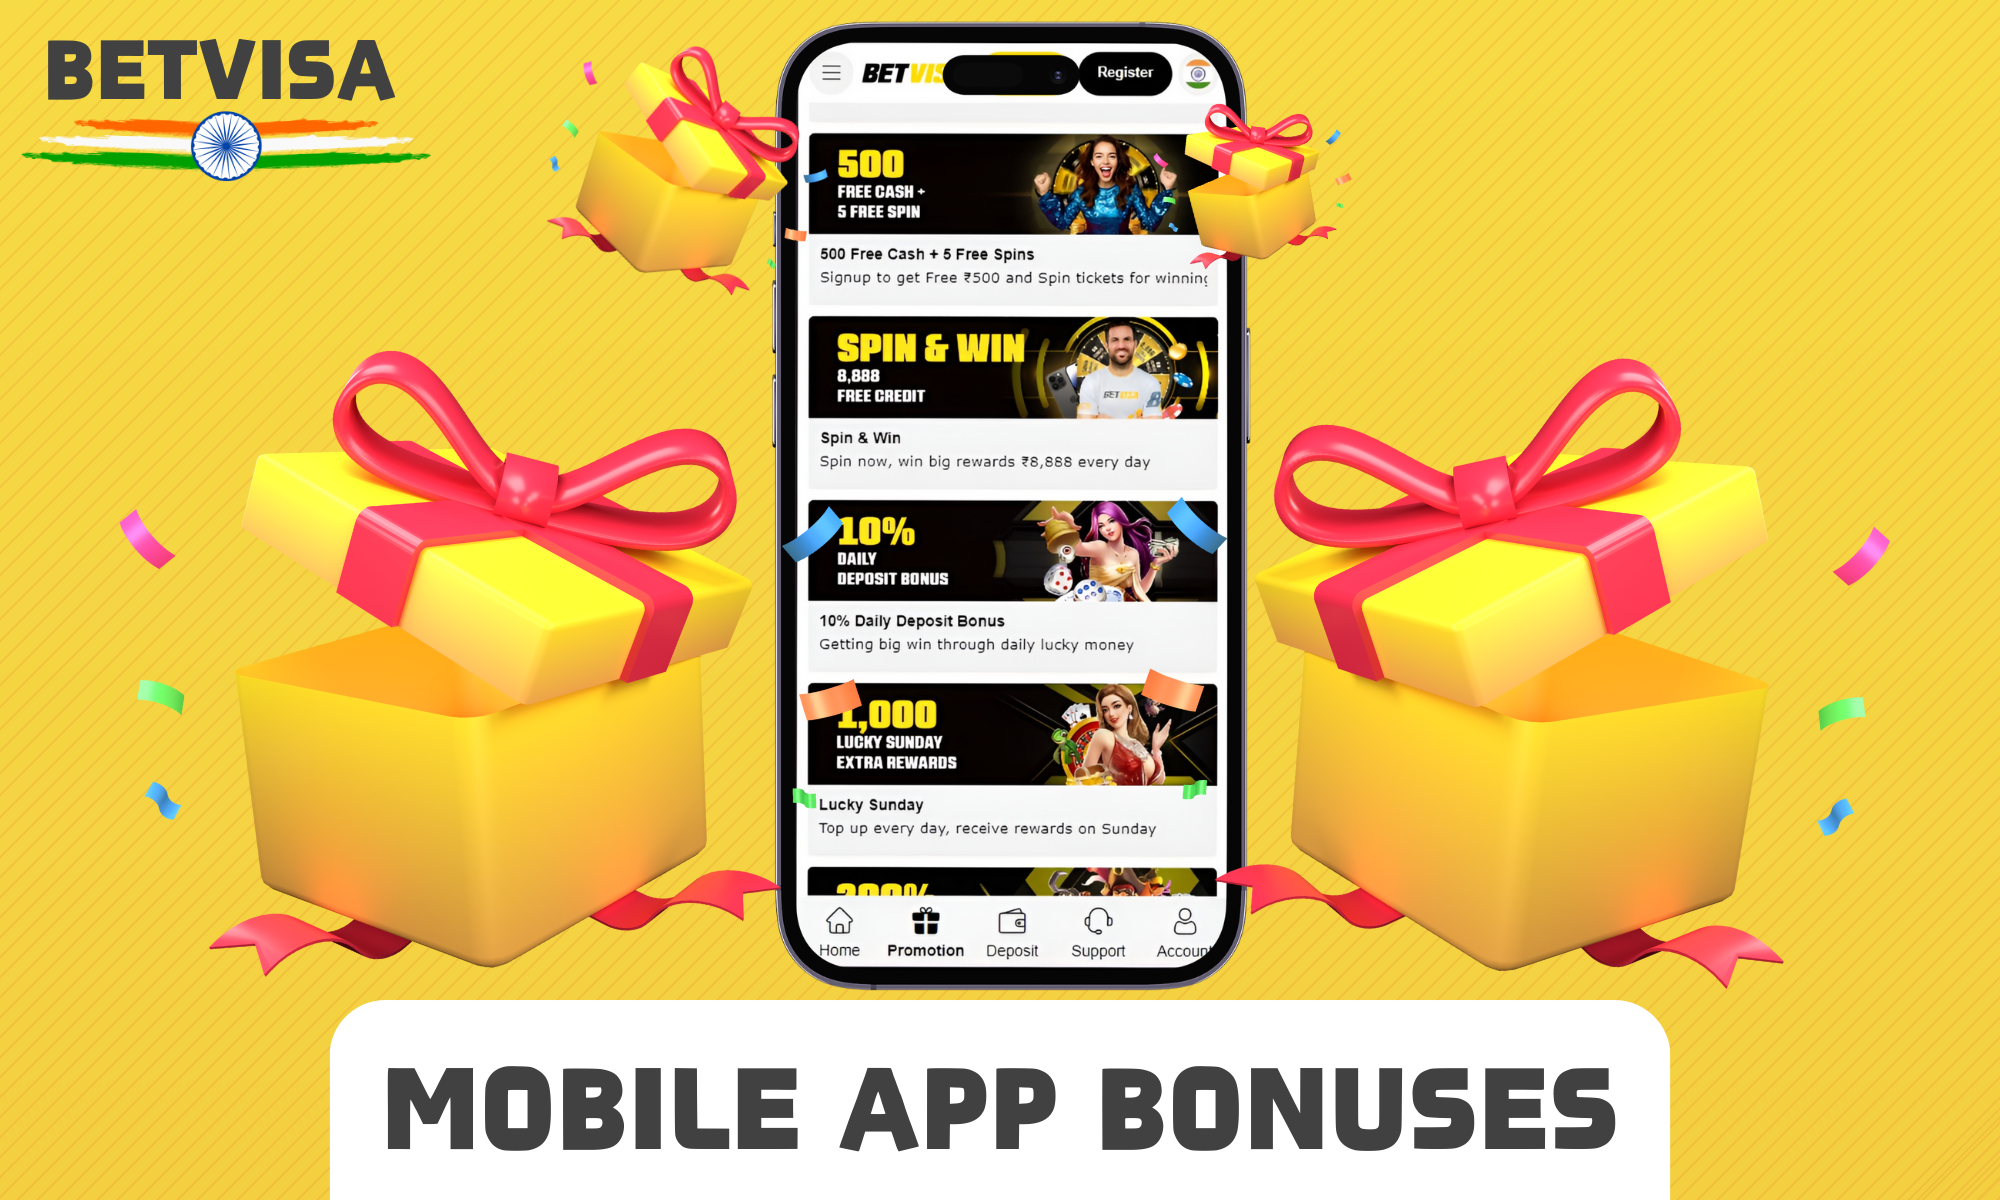 A wide range of bonuses available in the Betvisa app